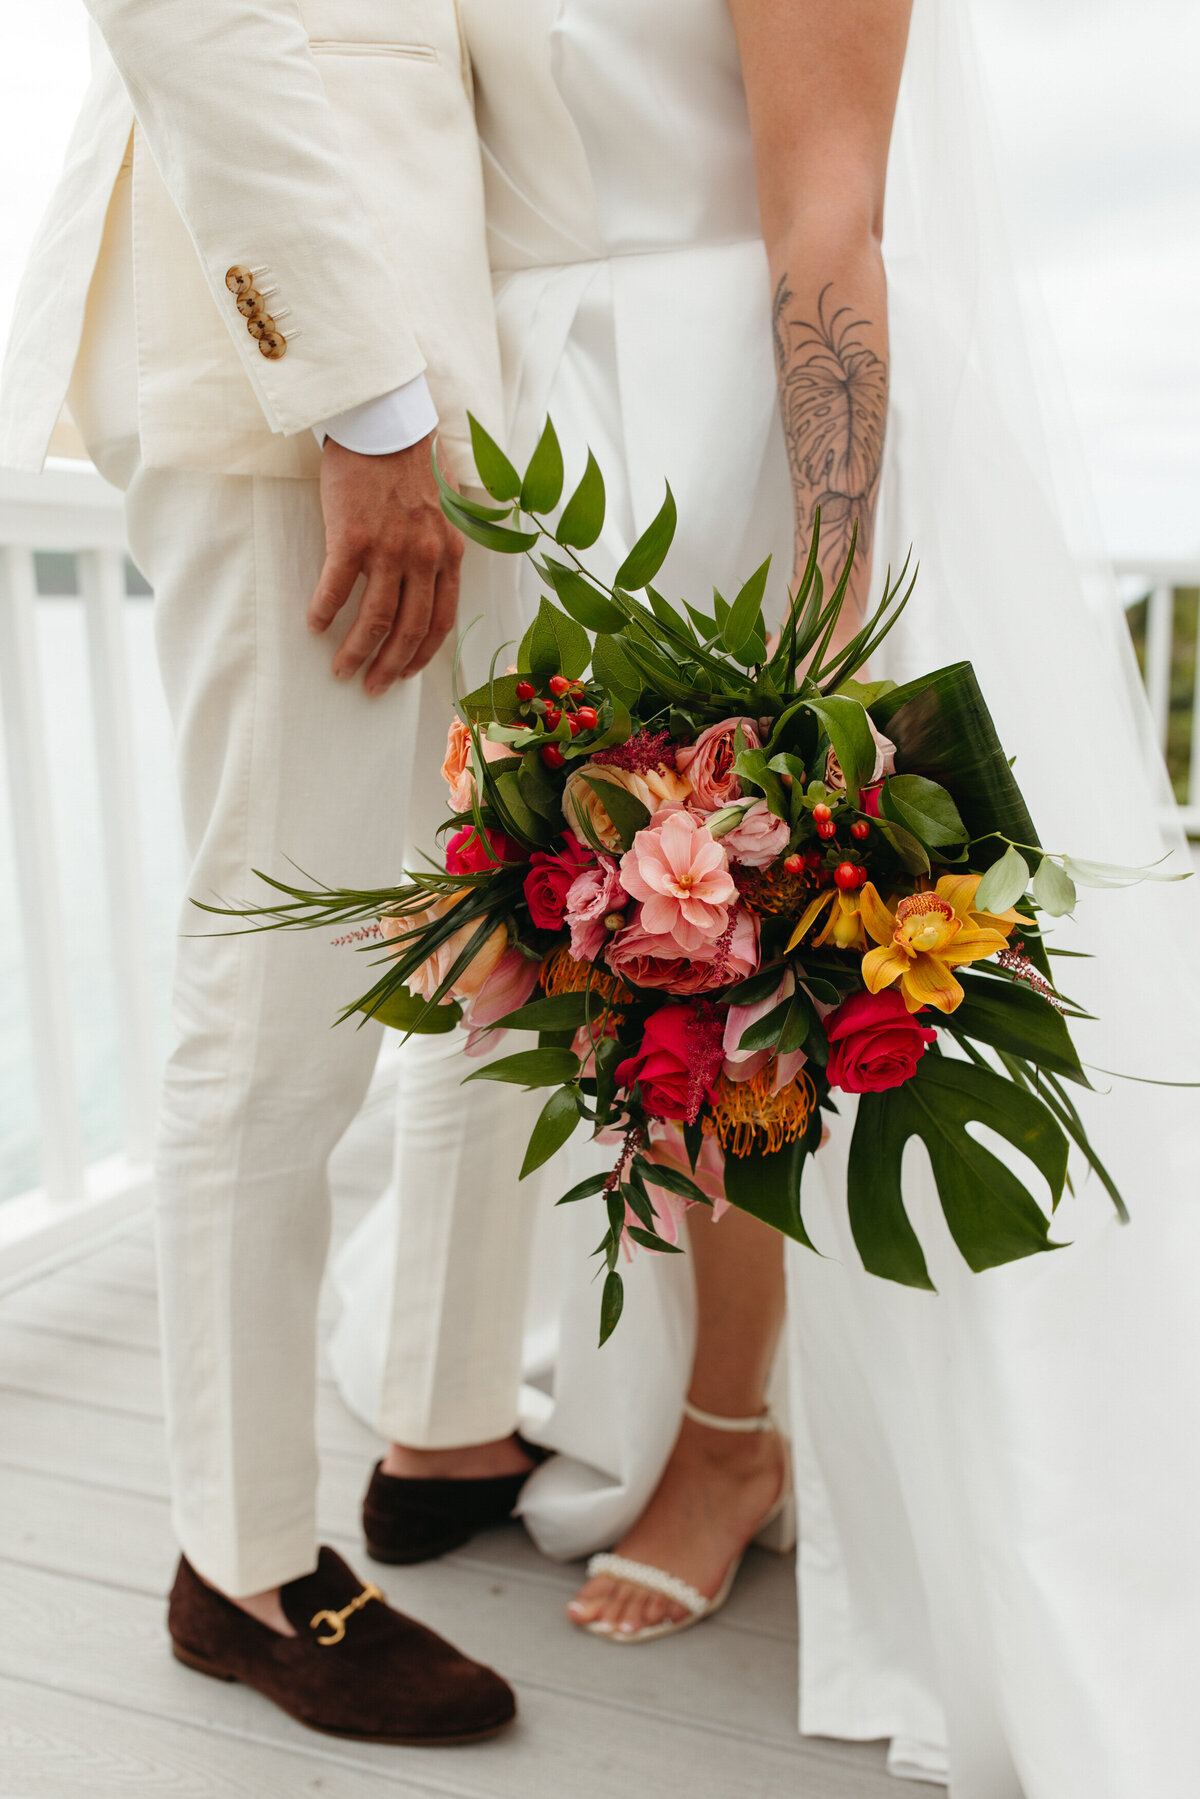 Close-up of a lush wedding bouquet with vibrant tropical flowers cradled by a person in a white suit next to a white-dressed partner